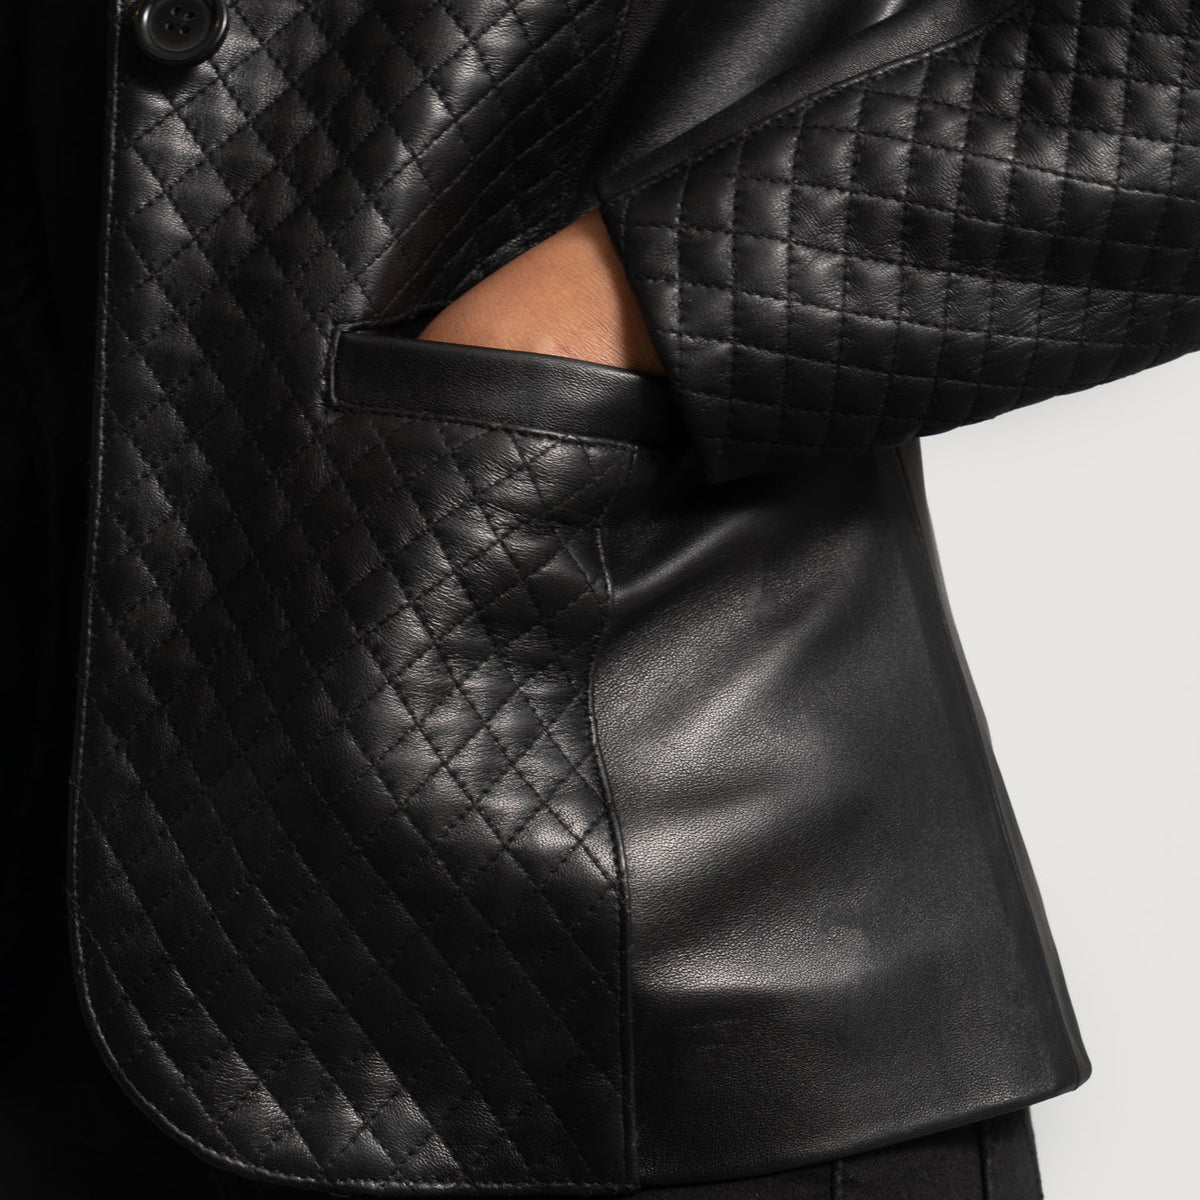 Ace Quilted Black Leather Blazer Plus Size